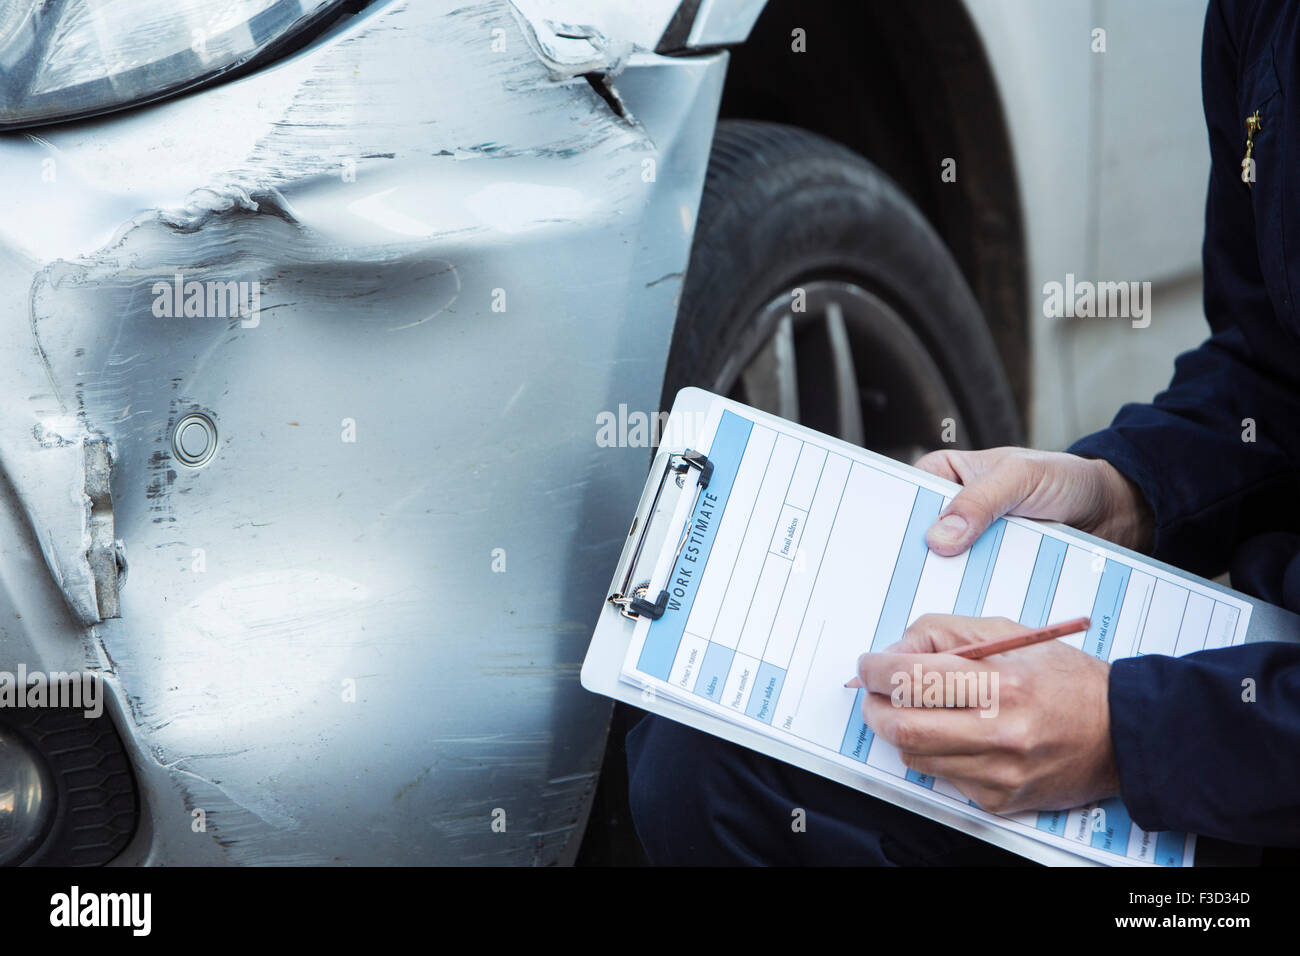 Auto Workshop Mechanic Inspecting Damage To Car And Filling In Repair Estimate Stock Photo